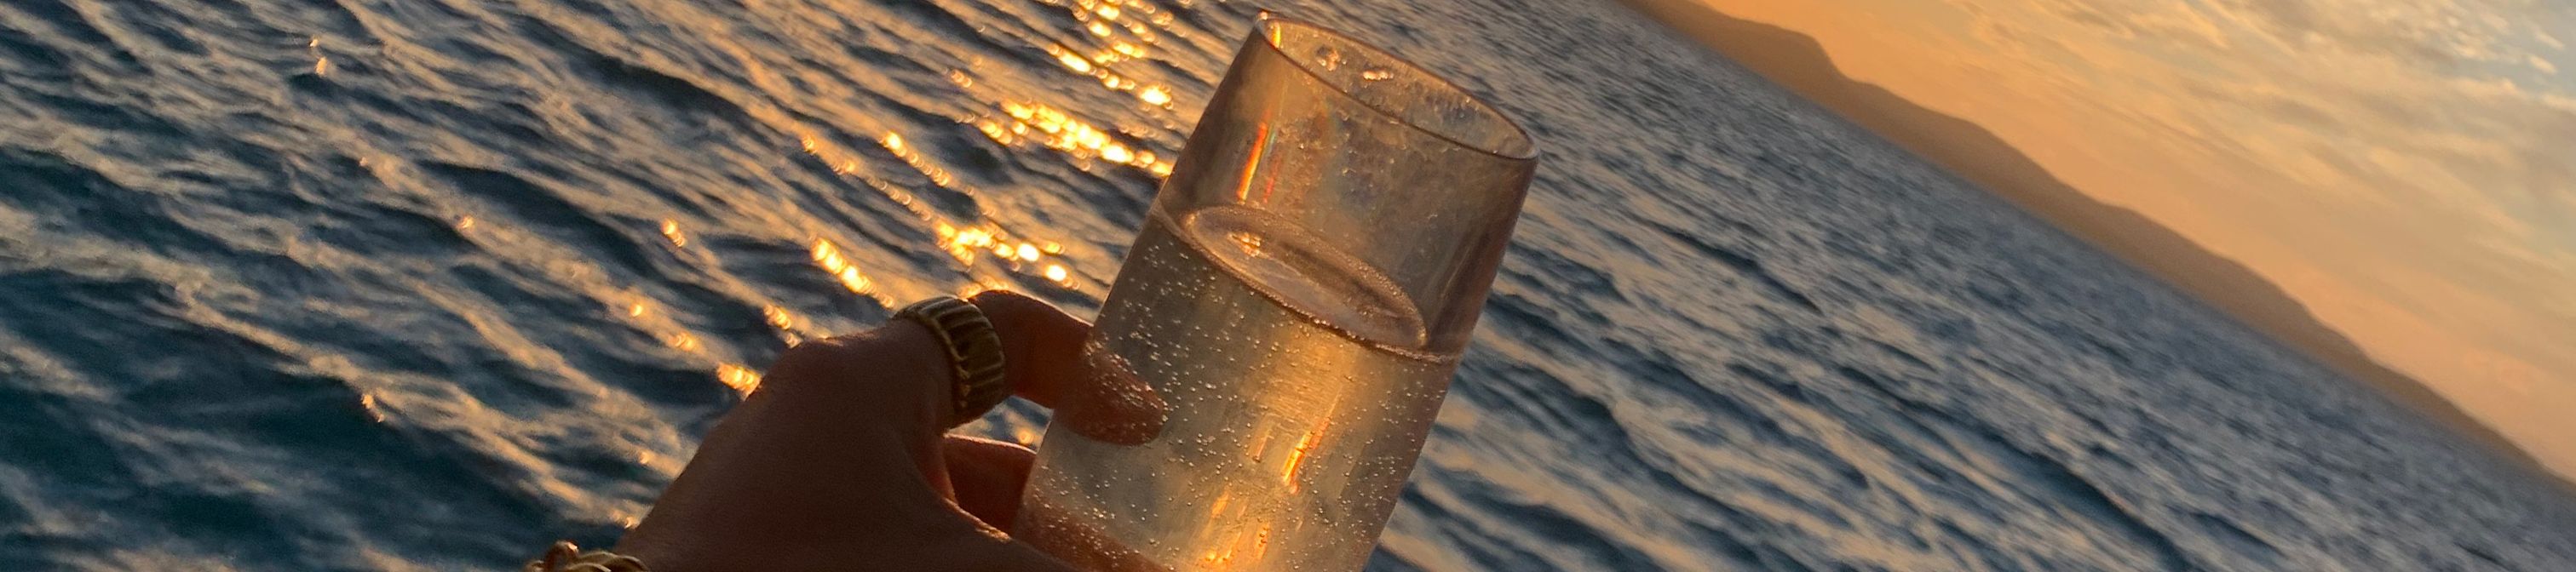 Bubbles in the sunset onboard a ship